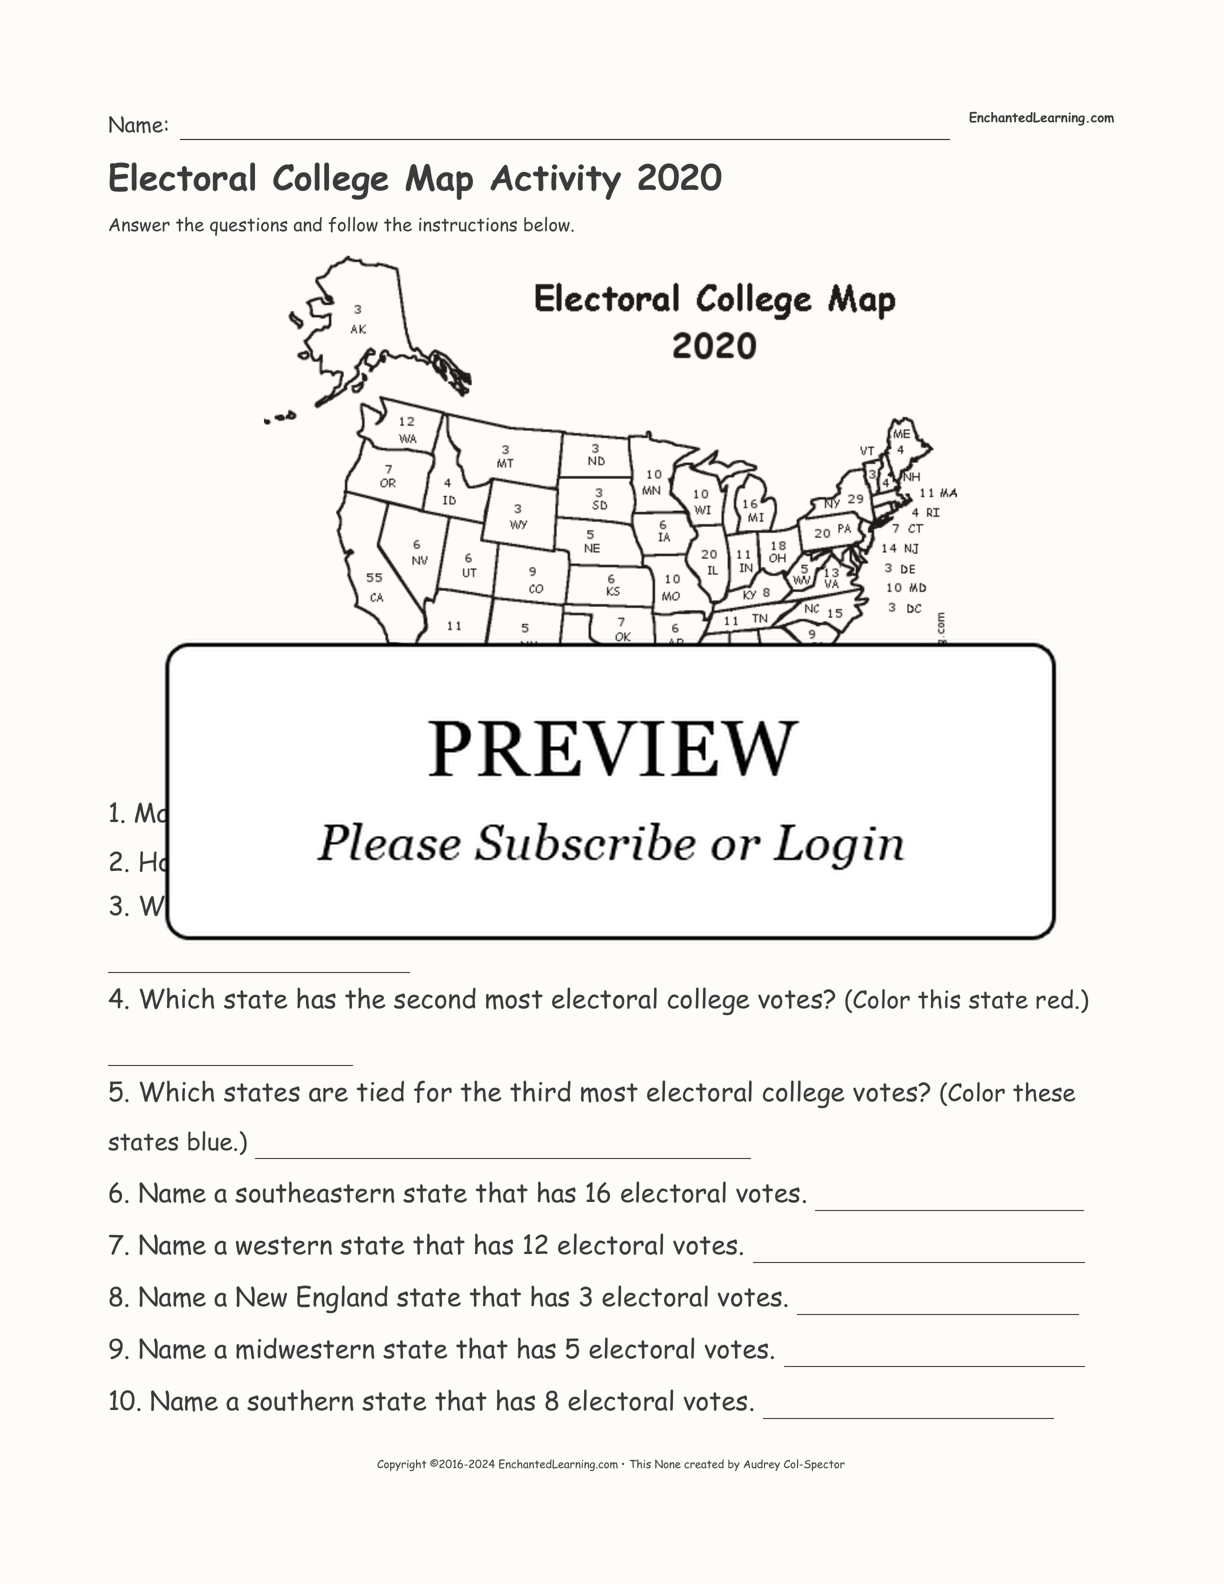 Electoral College Map Activity 21 - Enchanted Learning Regarding The Electoral Process Worksheet Answers